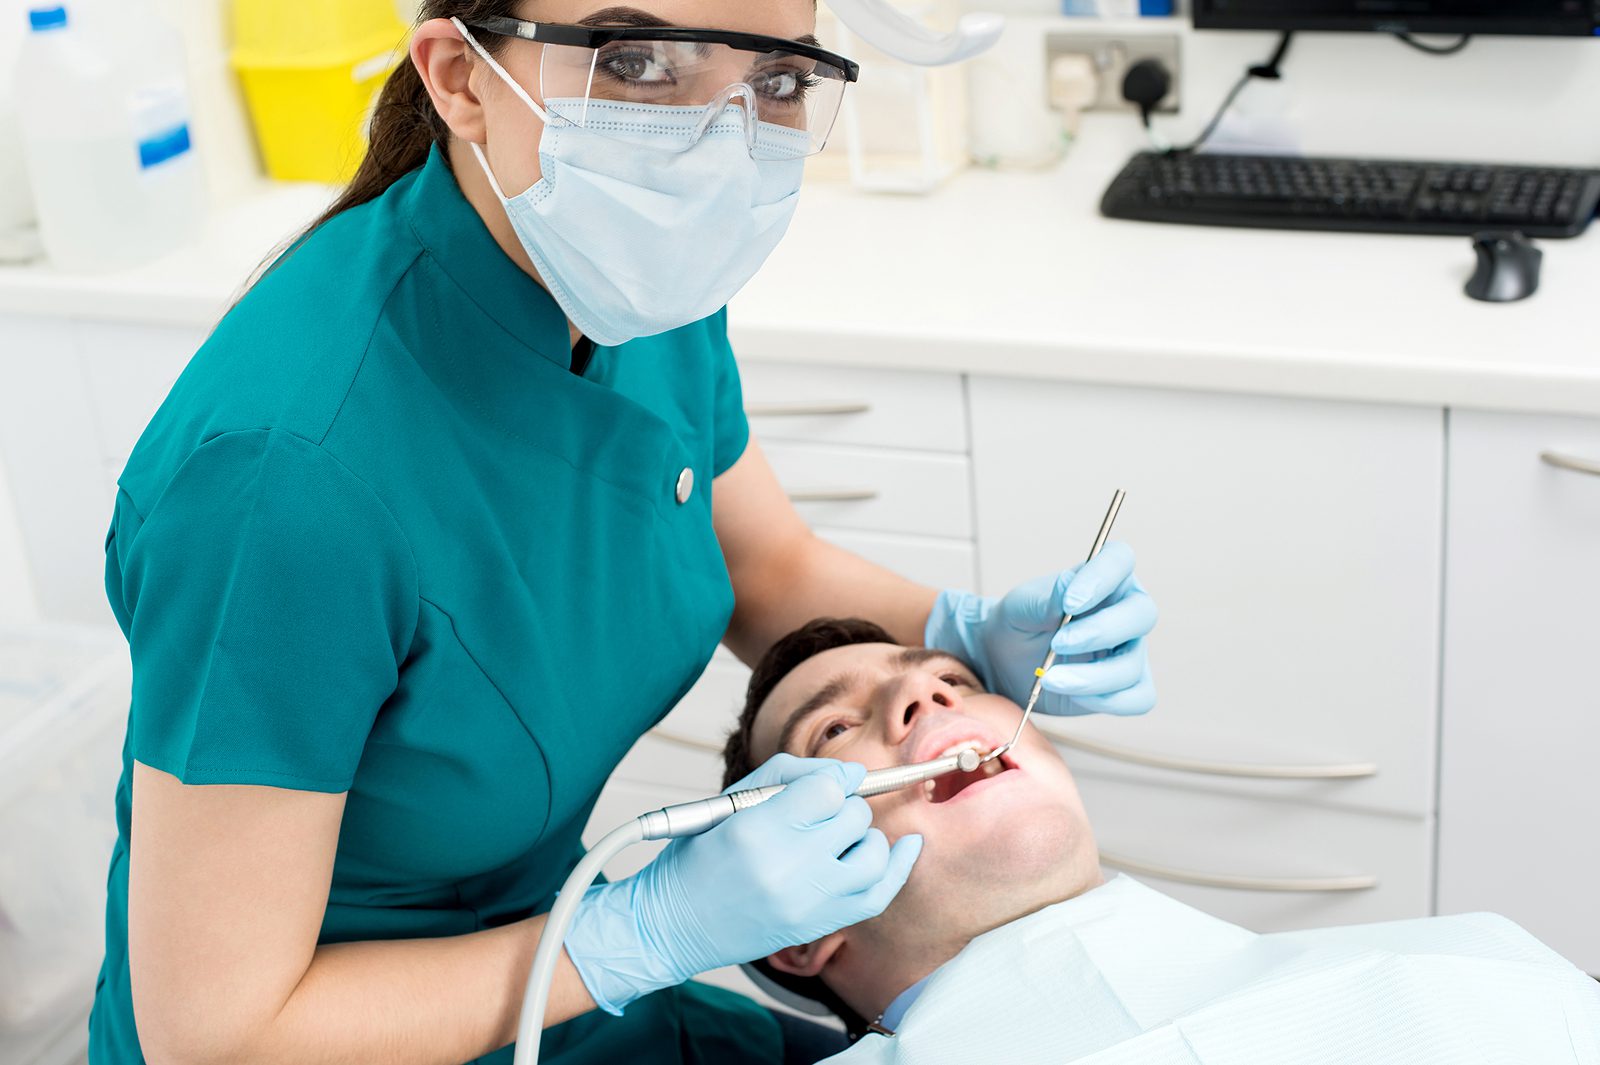 Getting Quality Dental Care in Mexico